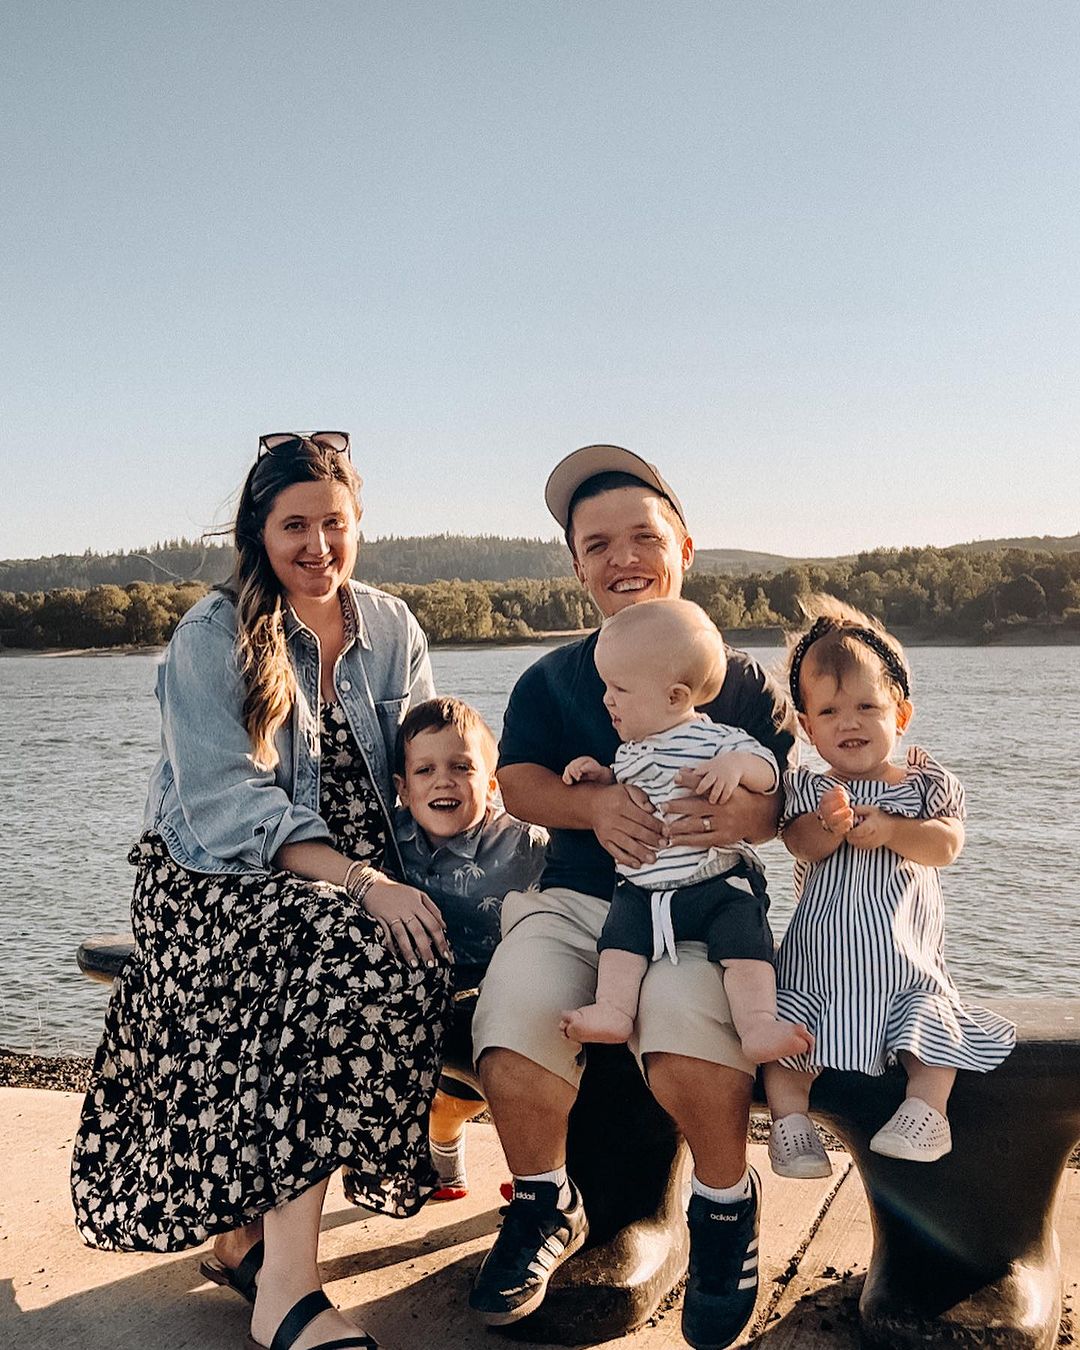 Tori and Zach took a group photo with their three children